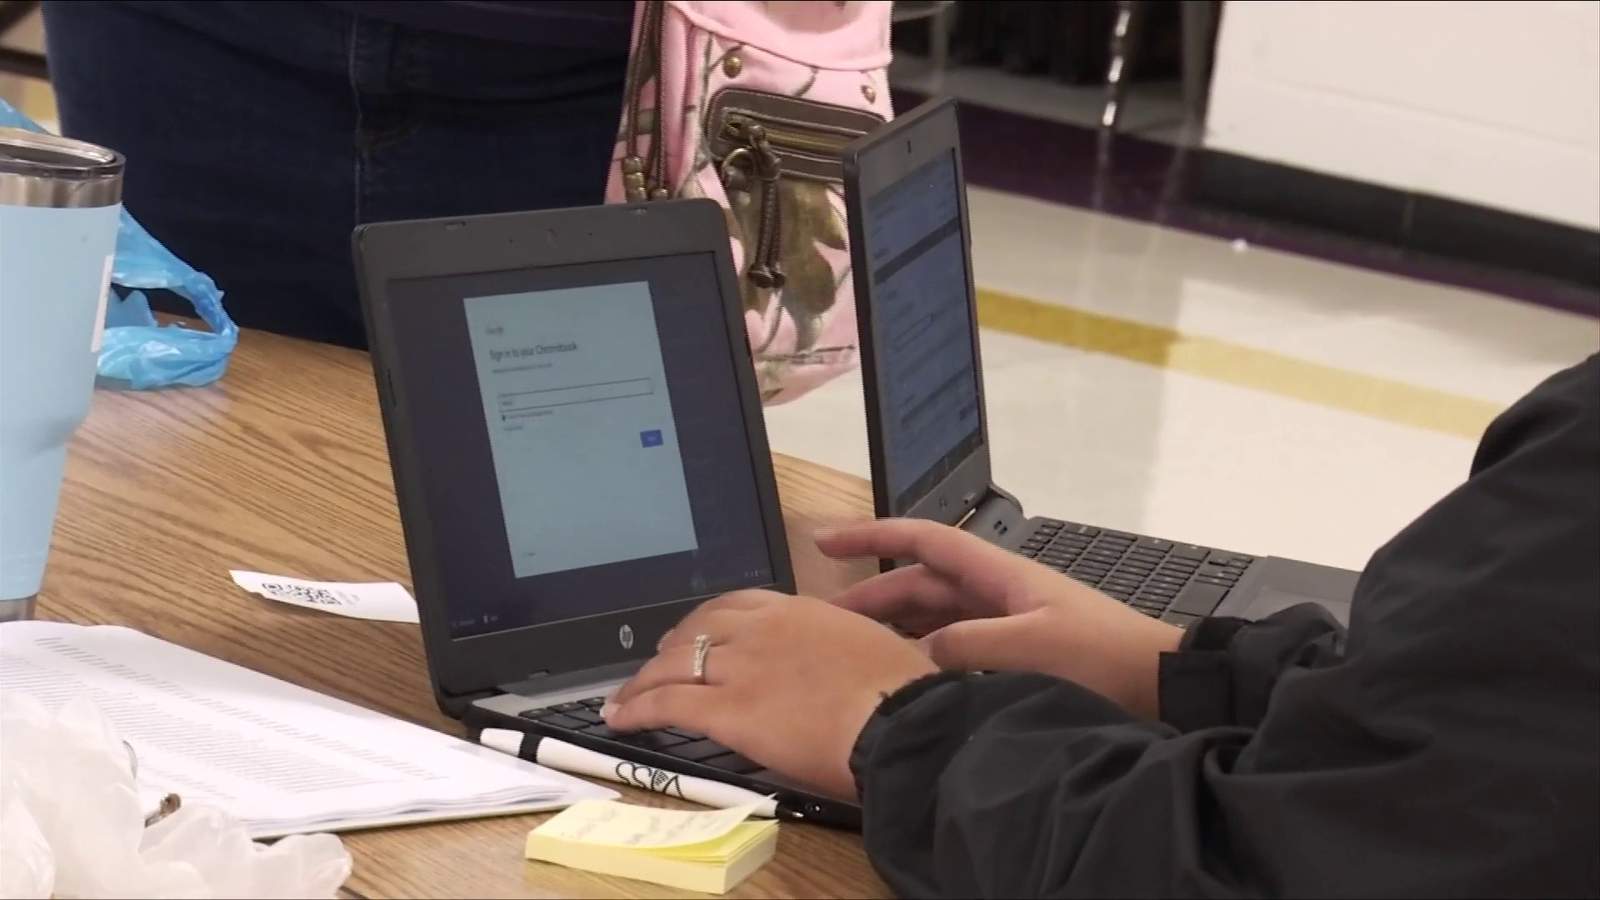 More than 1,600 Amherst County families opt-in for remote learning